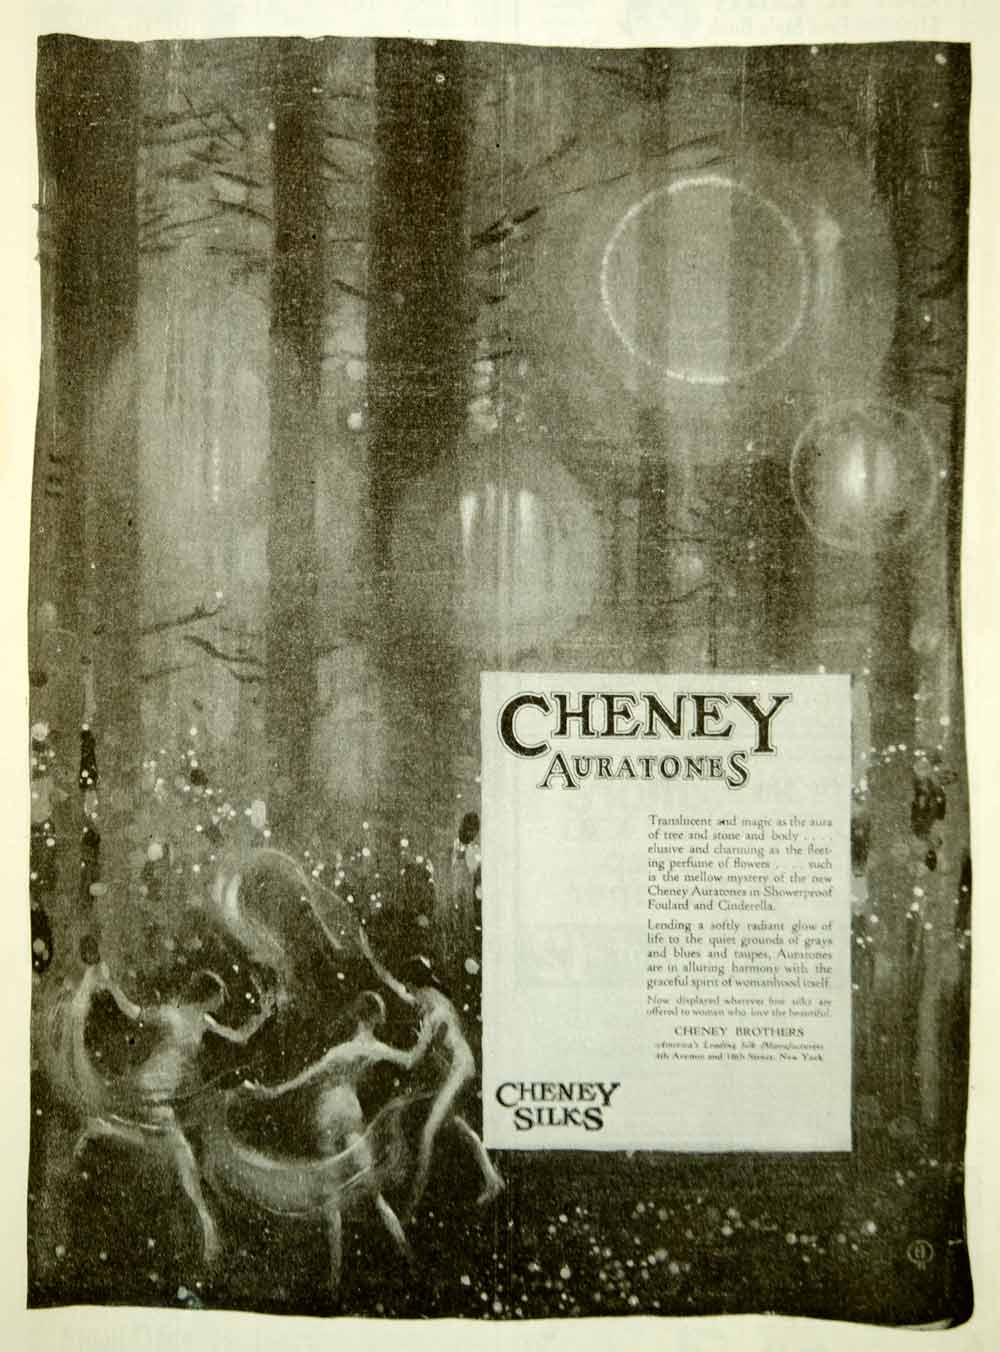 1919 Ad Vintage Cheney Brothers Auratone Fabric Silk Nude Dancers Fairies Forest